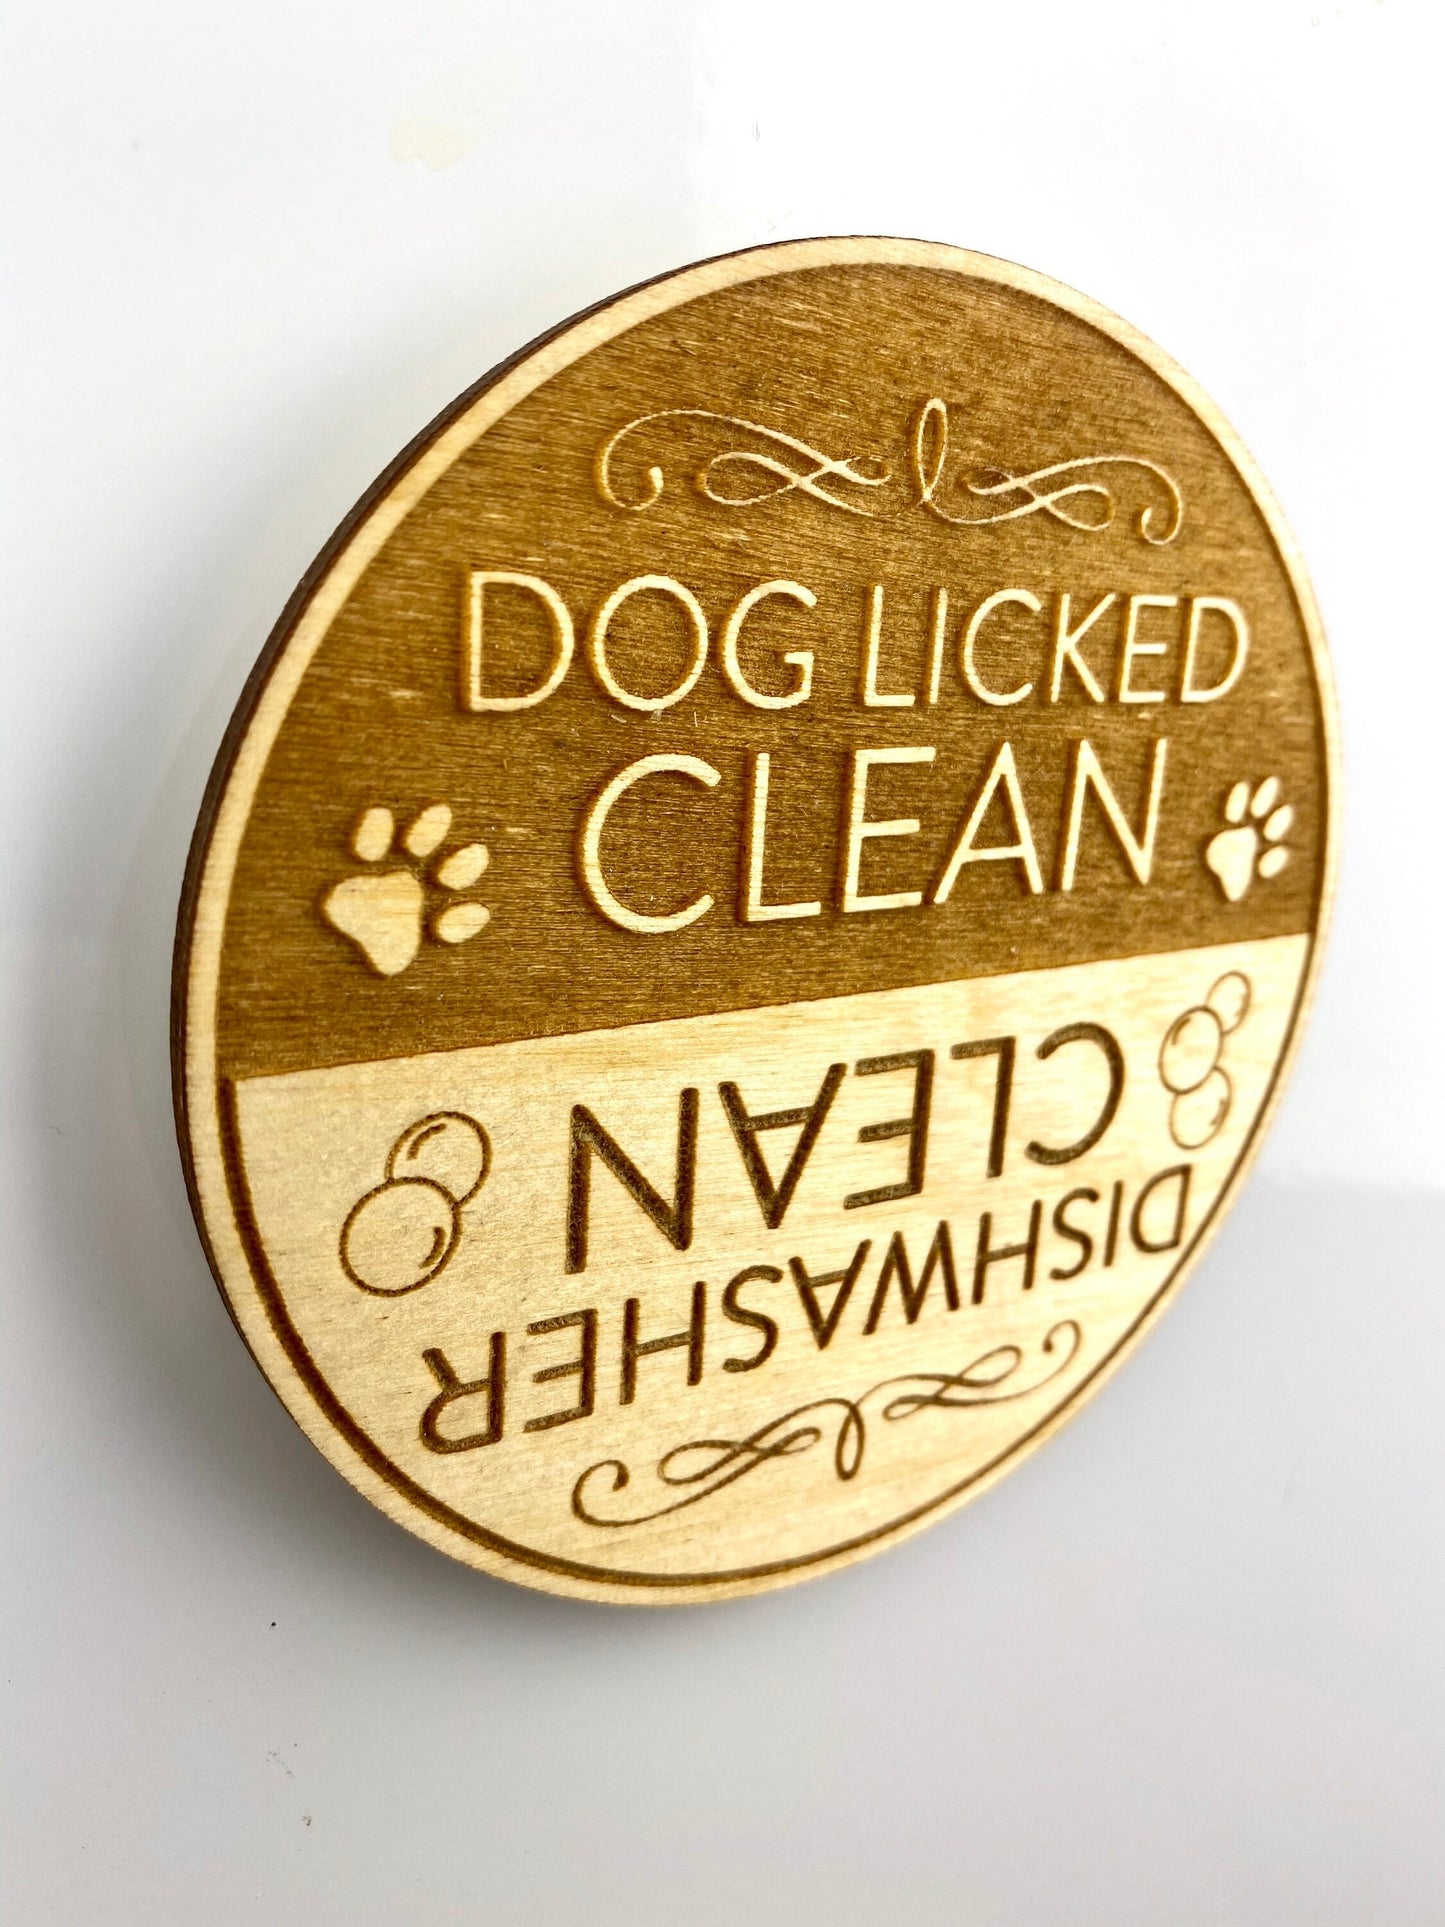 Dirty/Clean Dishwasher Magnets | Funny Dog Decor | Dog Licked Them Clean